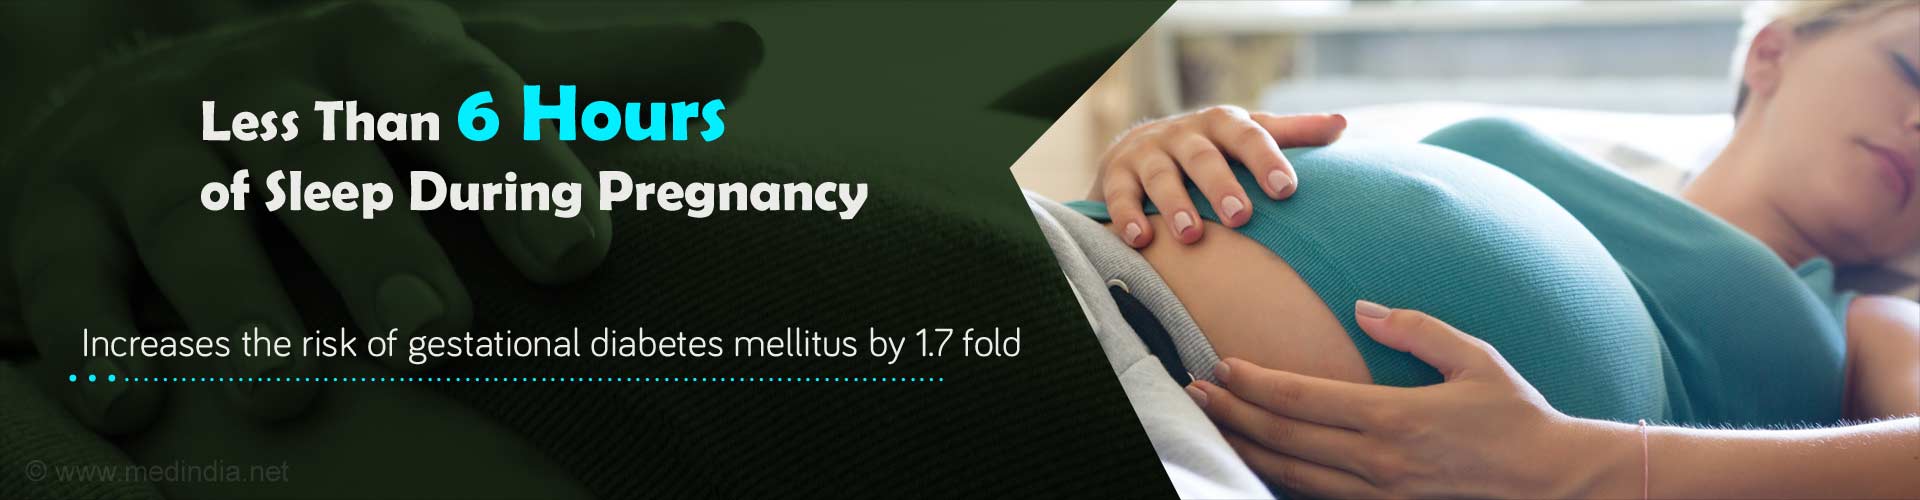 less than 6 hours of sleep during pregnancy
- increases the risk of gestational diabetes mellitus by 1.7 fold